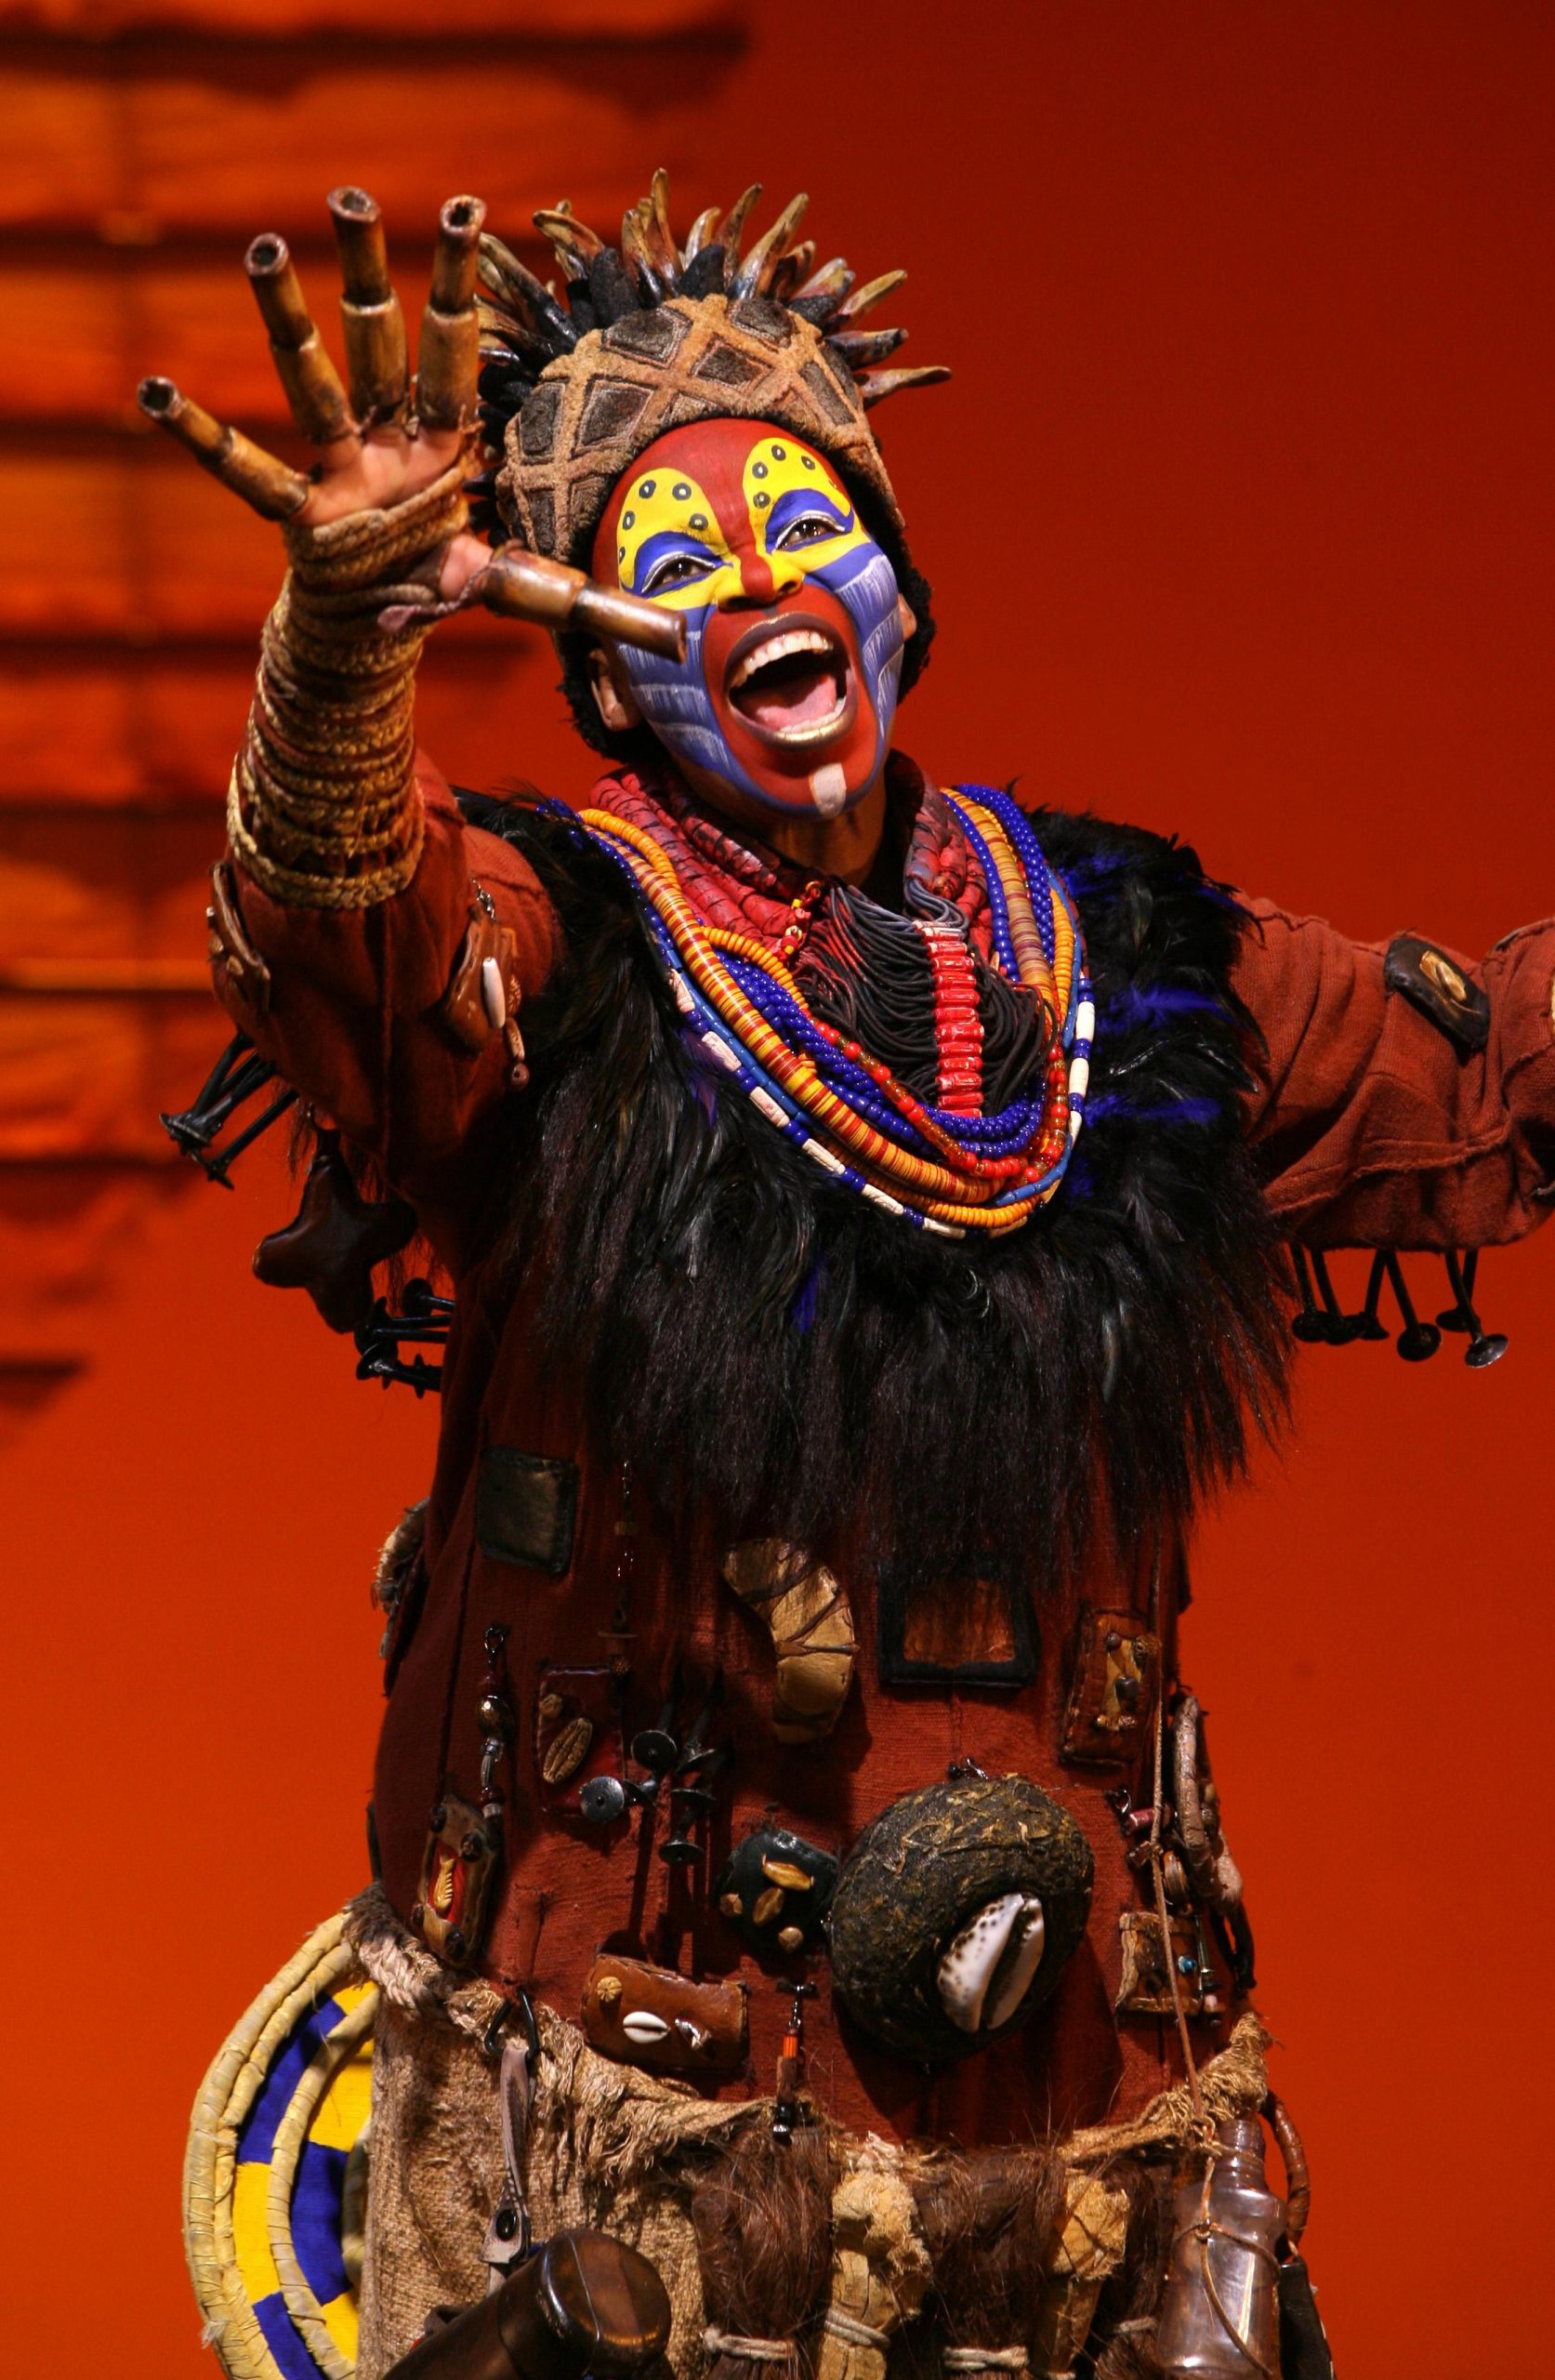 Disney On Broadway Return Dates For THE LION KING And ALADDIN